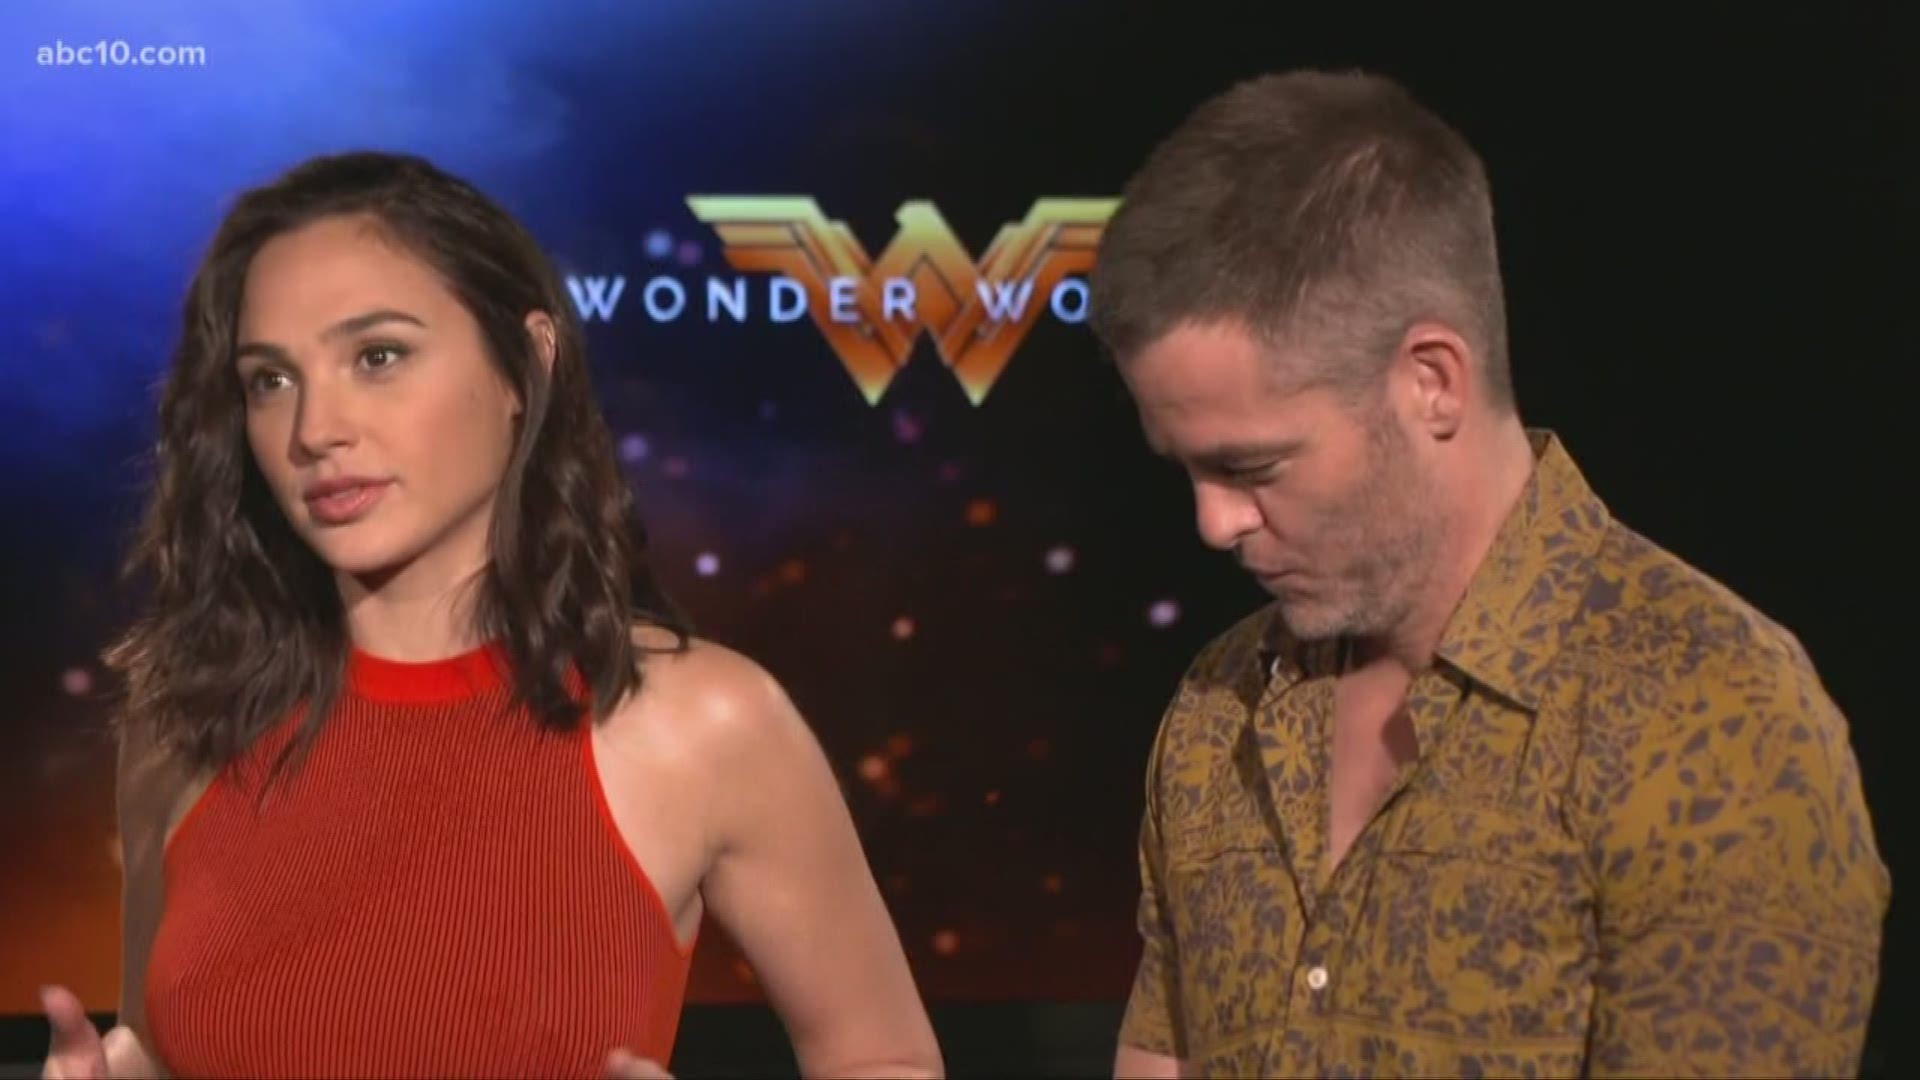 In today's entertainment news roundup, Wonder Woman 1984 premiere has been postponed, Bad Boys 3 will soon be on streaming, and stars read books on Disney social.